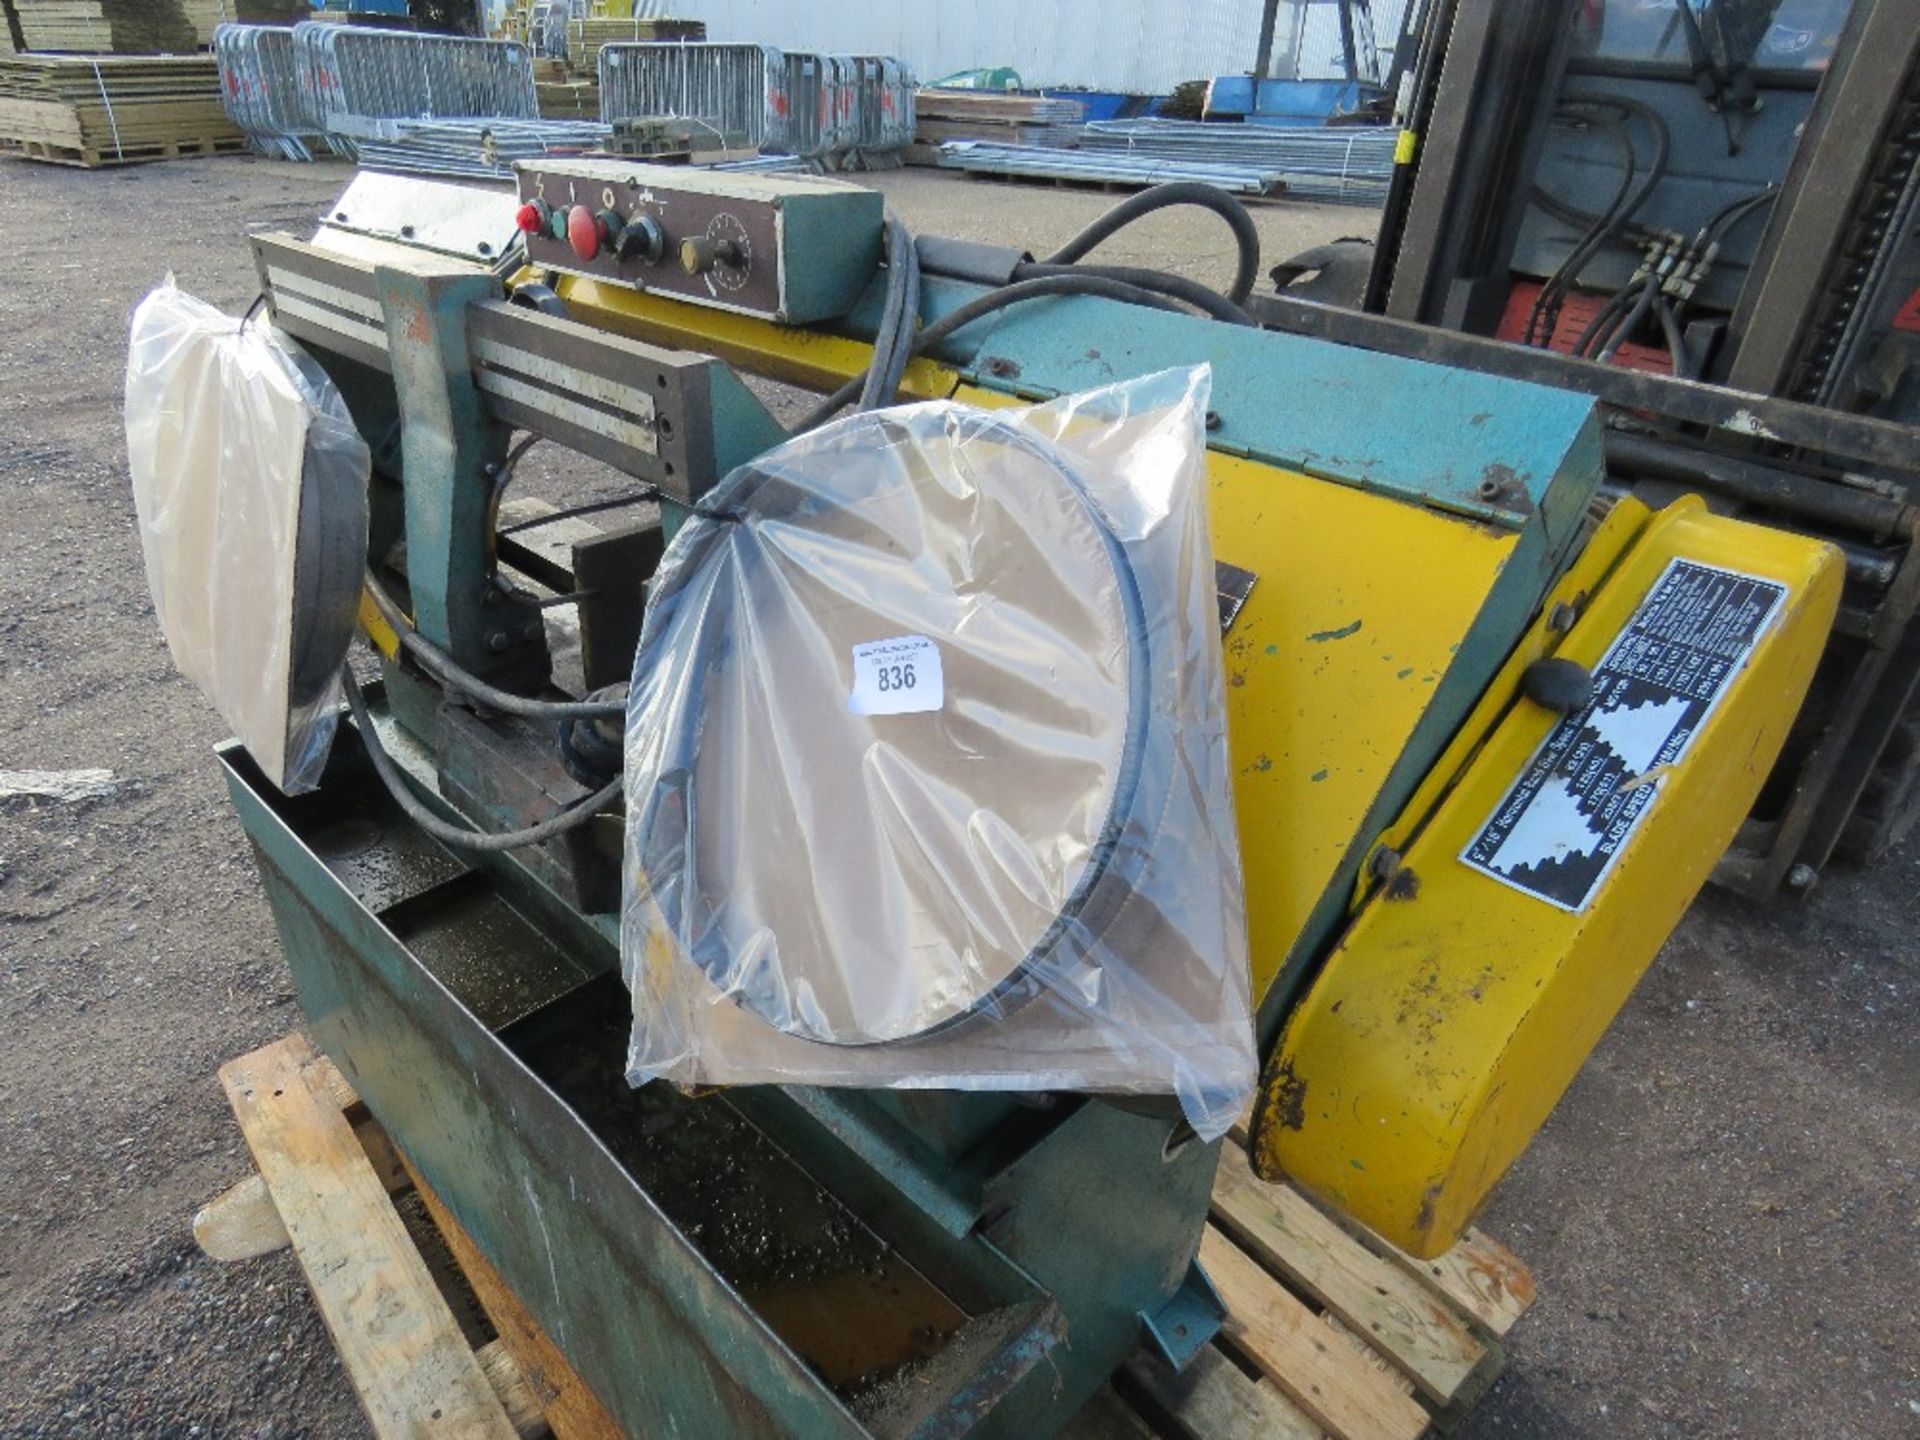 3 PHASE POWERED METAL CUTTING BANDSAW C/W SPARE BLADES. DIRECT EX LOCAL FARM...WORKING WHEN RECENTLY - Image 6 of 7